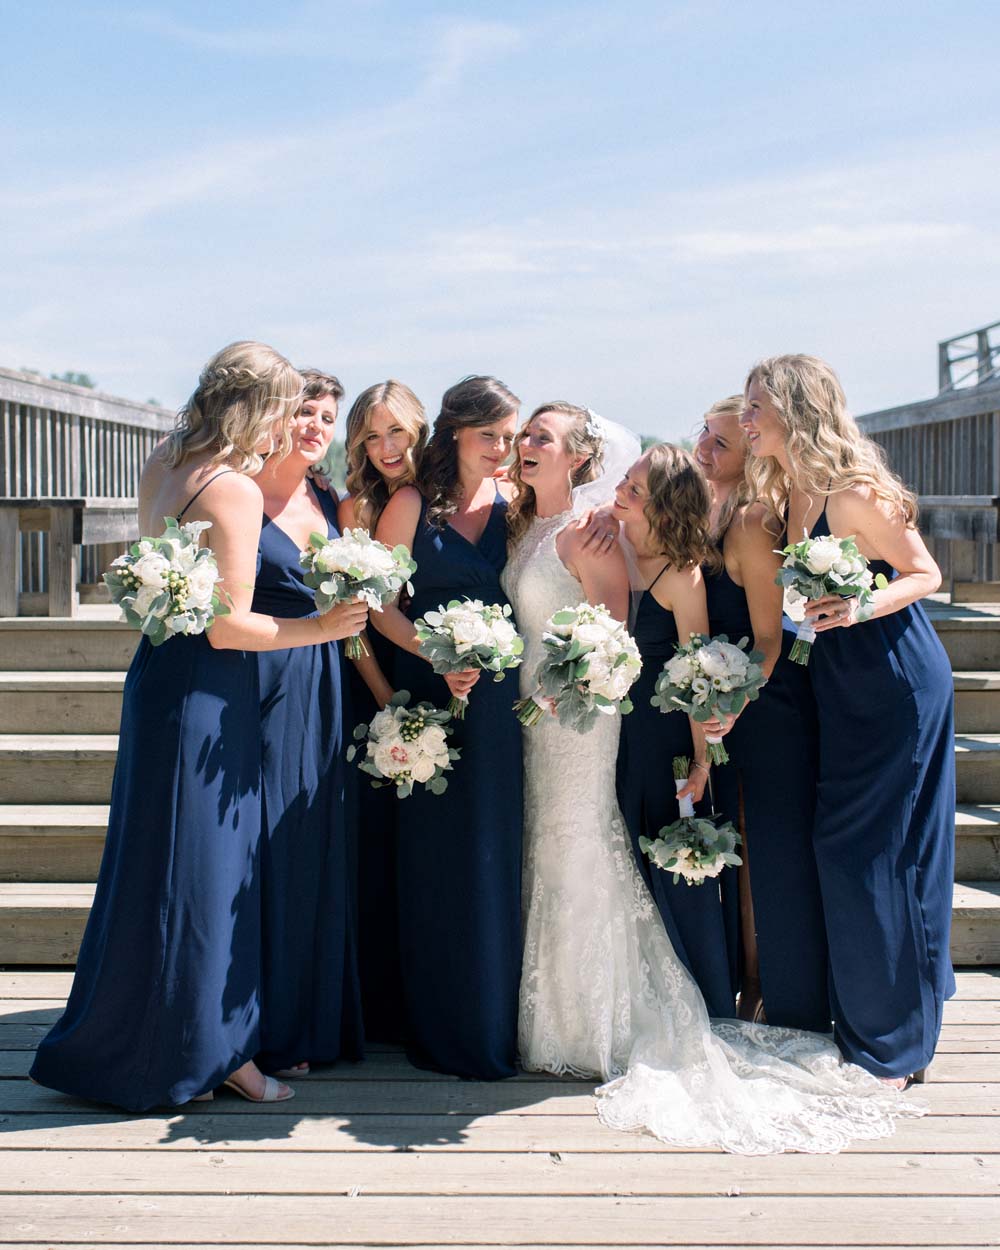 Olympian Rosie McLennan's Cottage Escape Wedding - Bride and bridesmaids